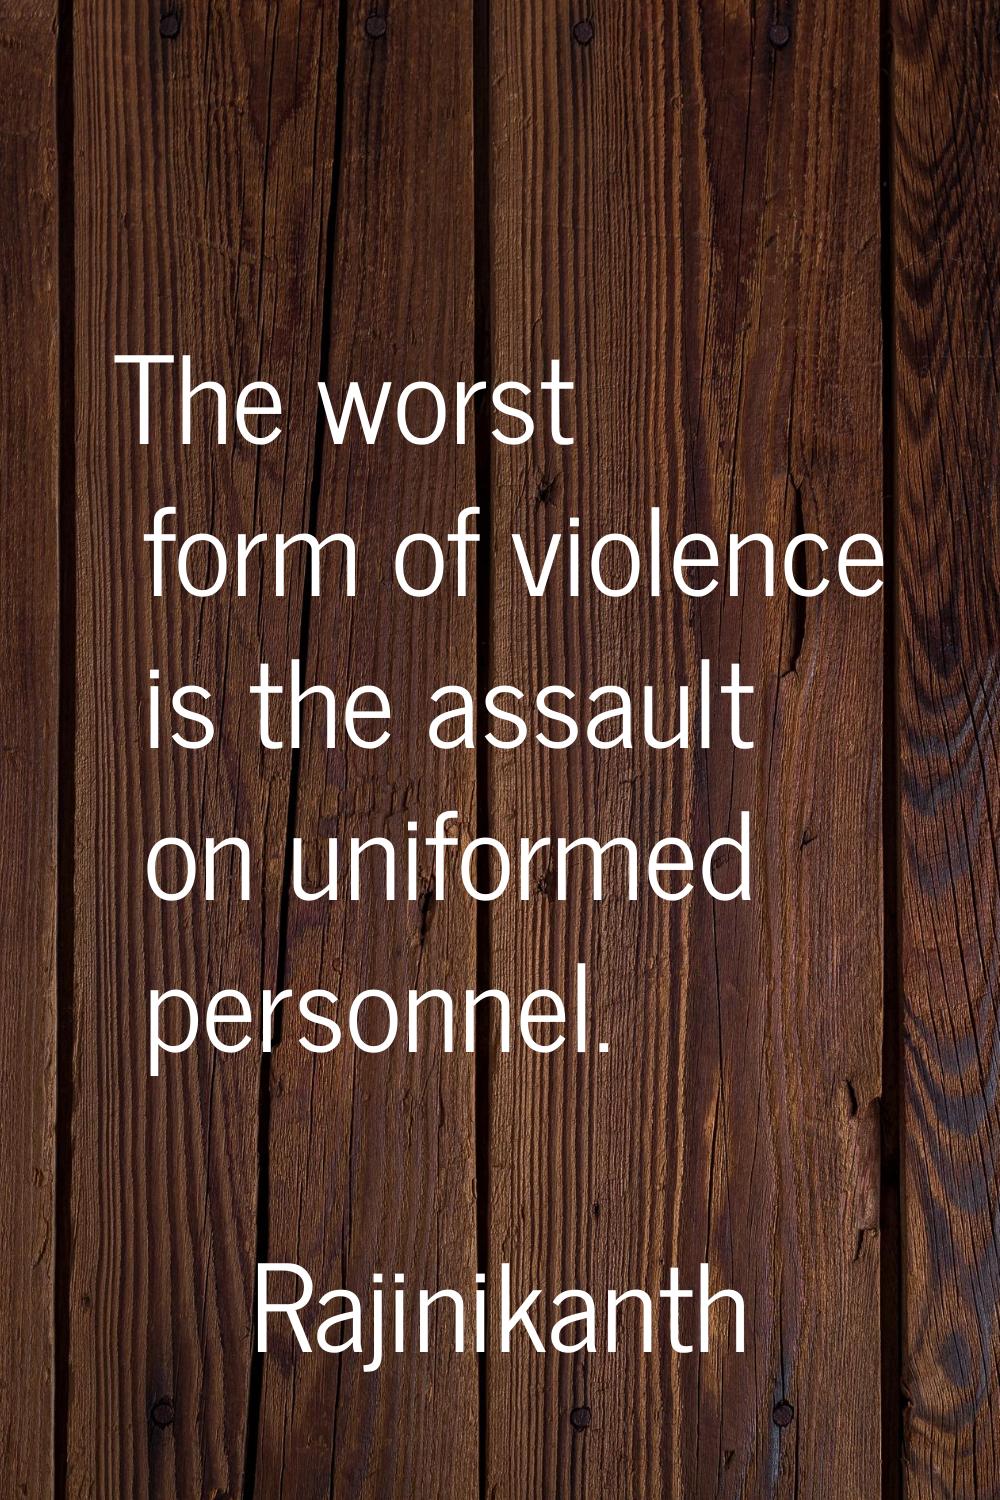 The worst form of violence is the assault on uniformed personnel.